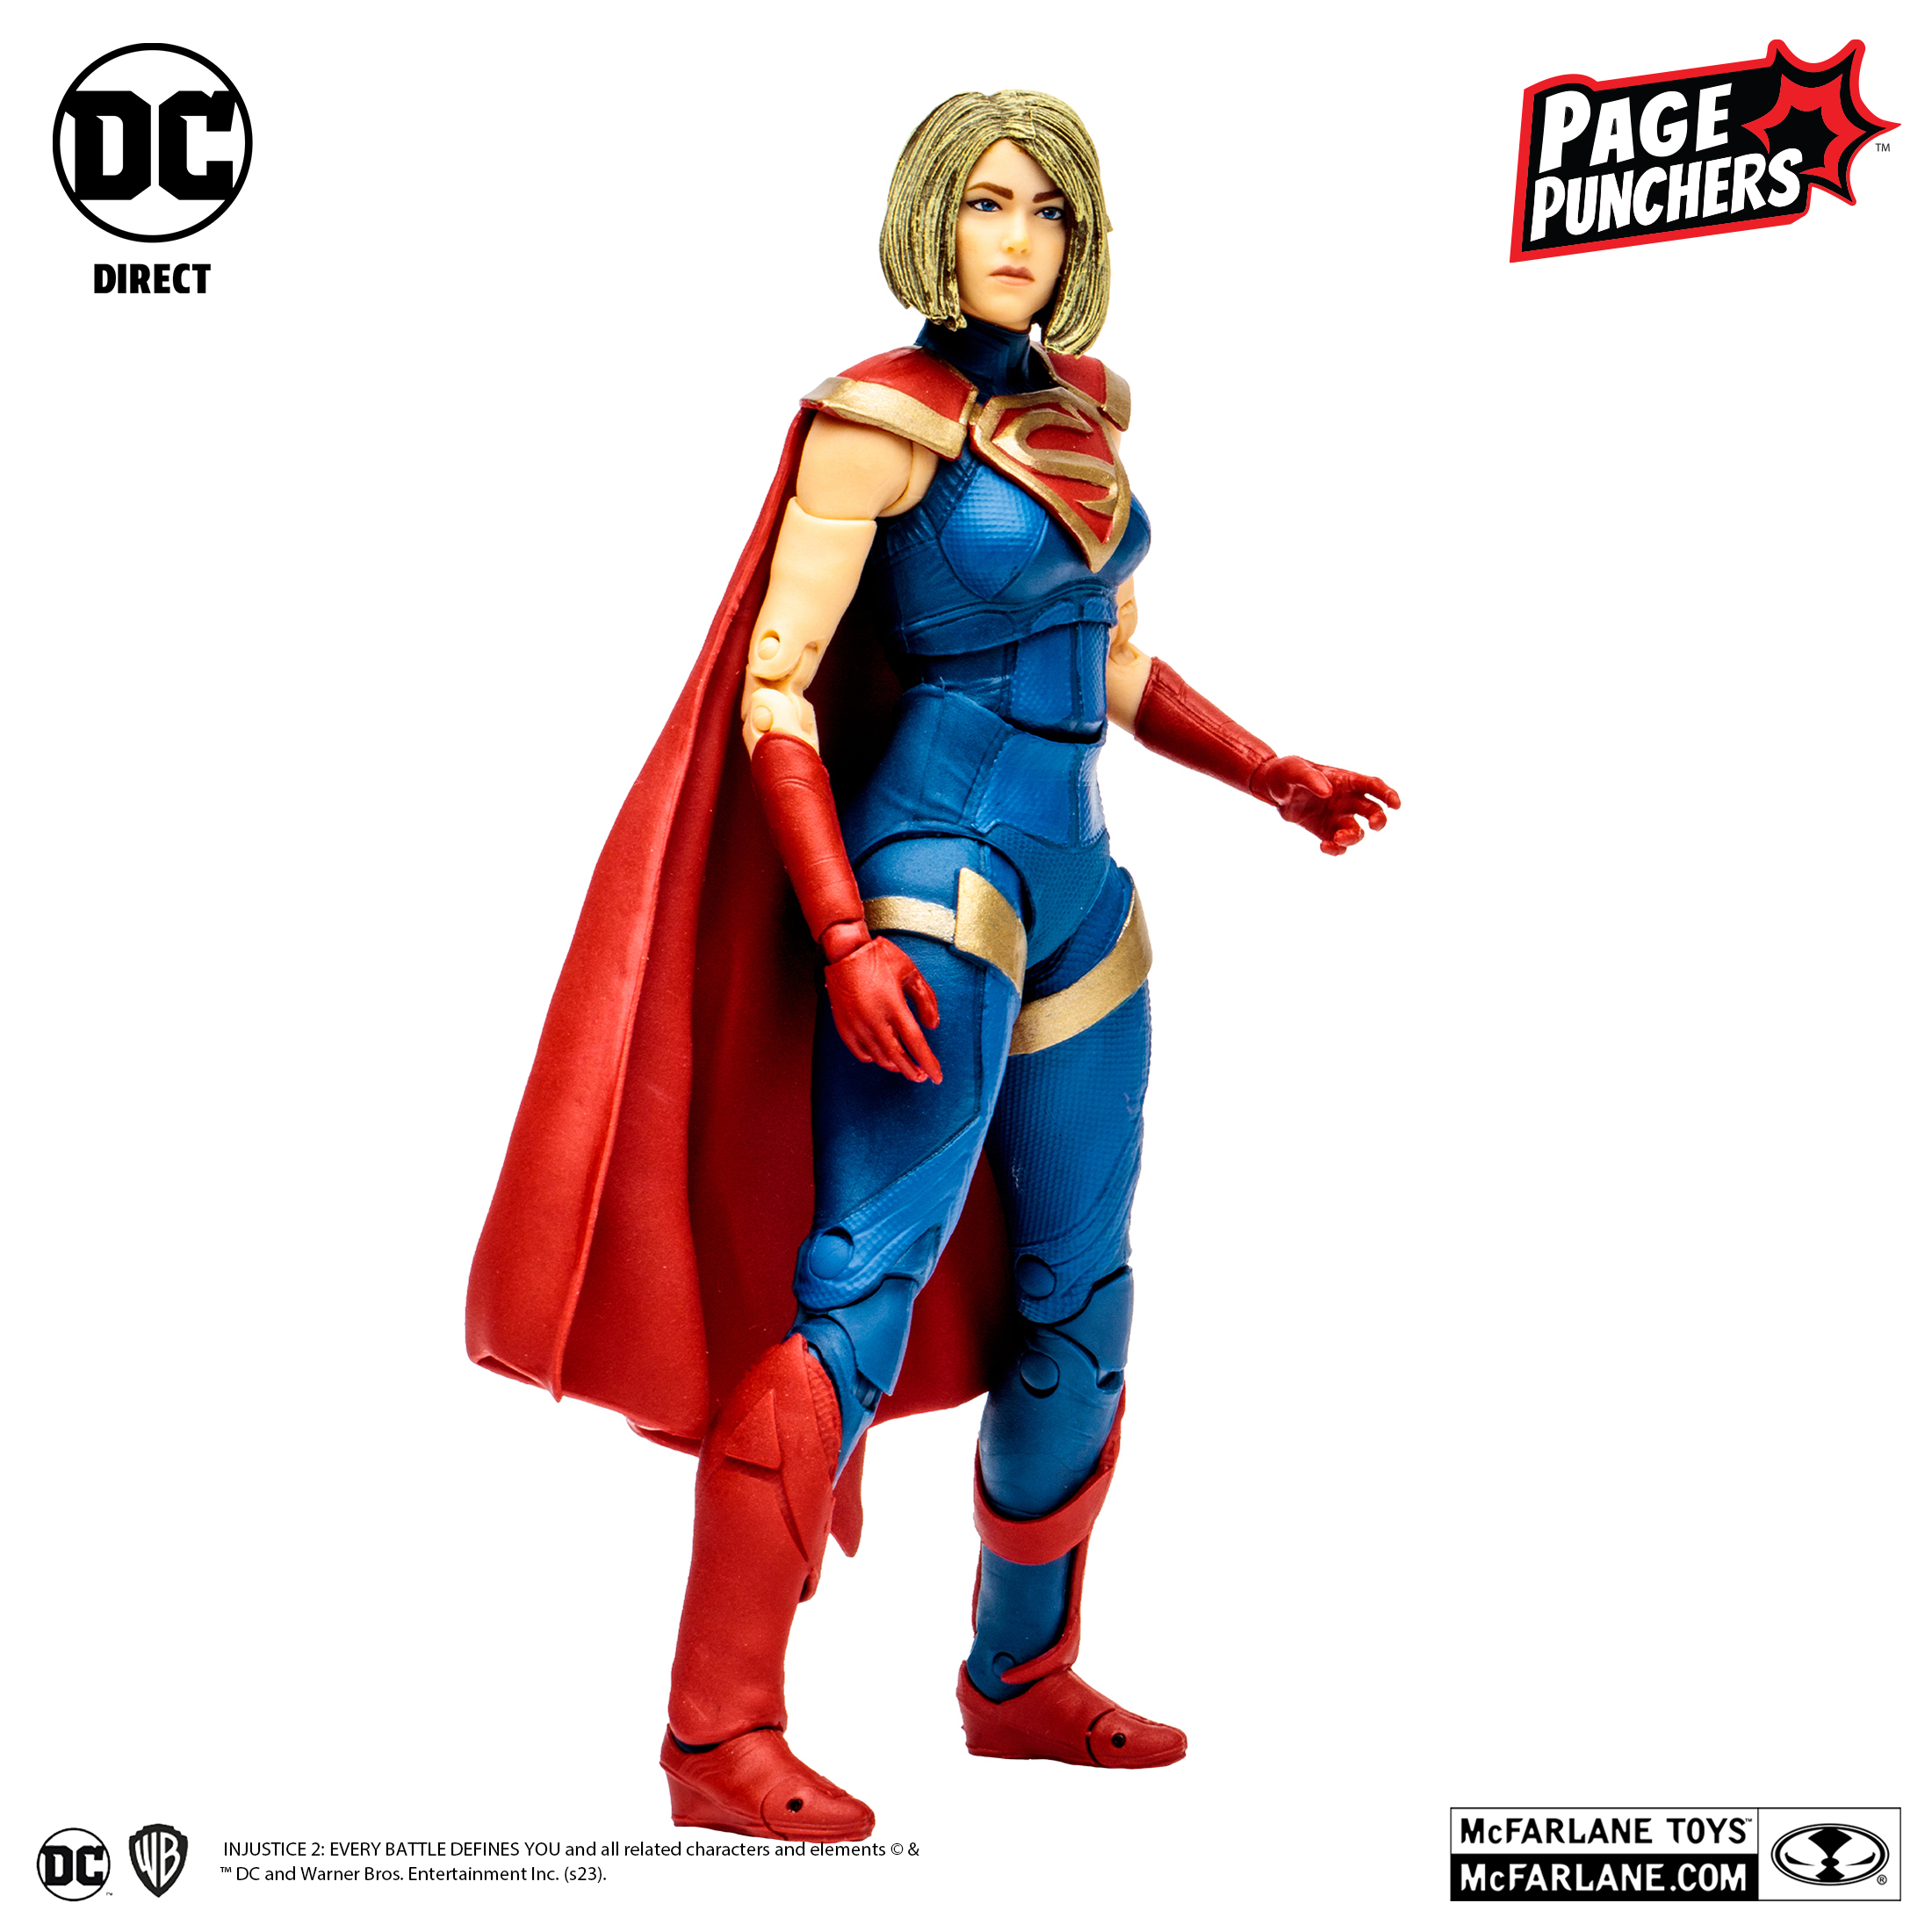 Supergirl 7″ Figure with Injustice 2 Comic (Page Punchers)